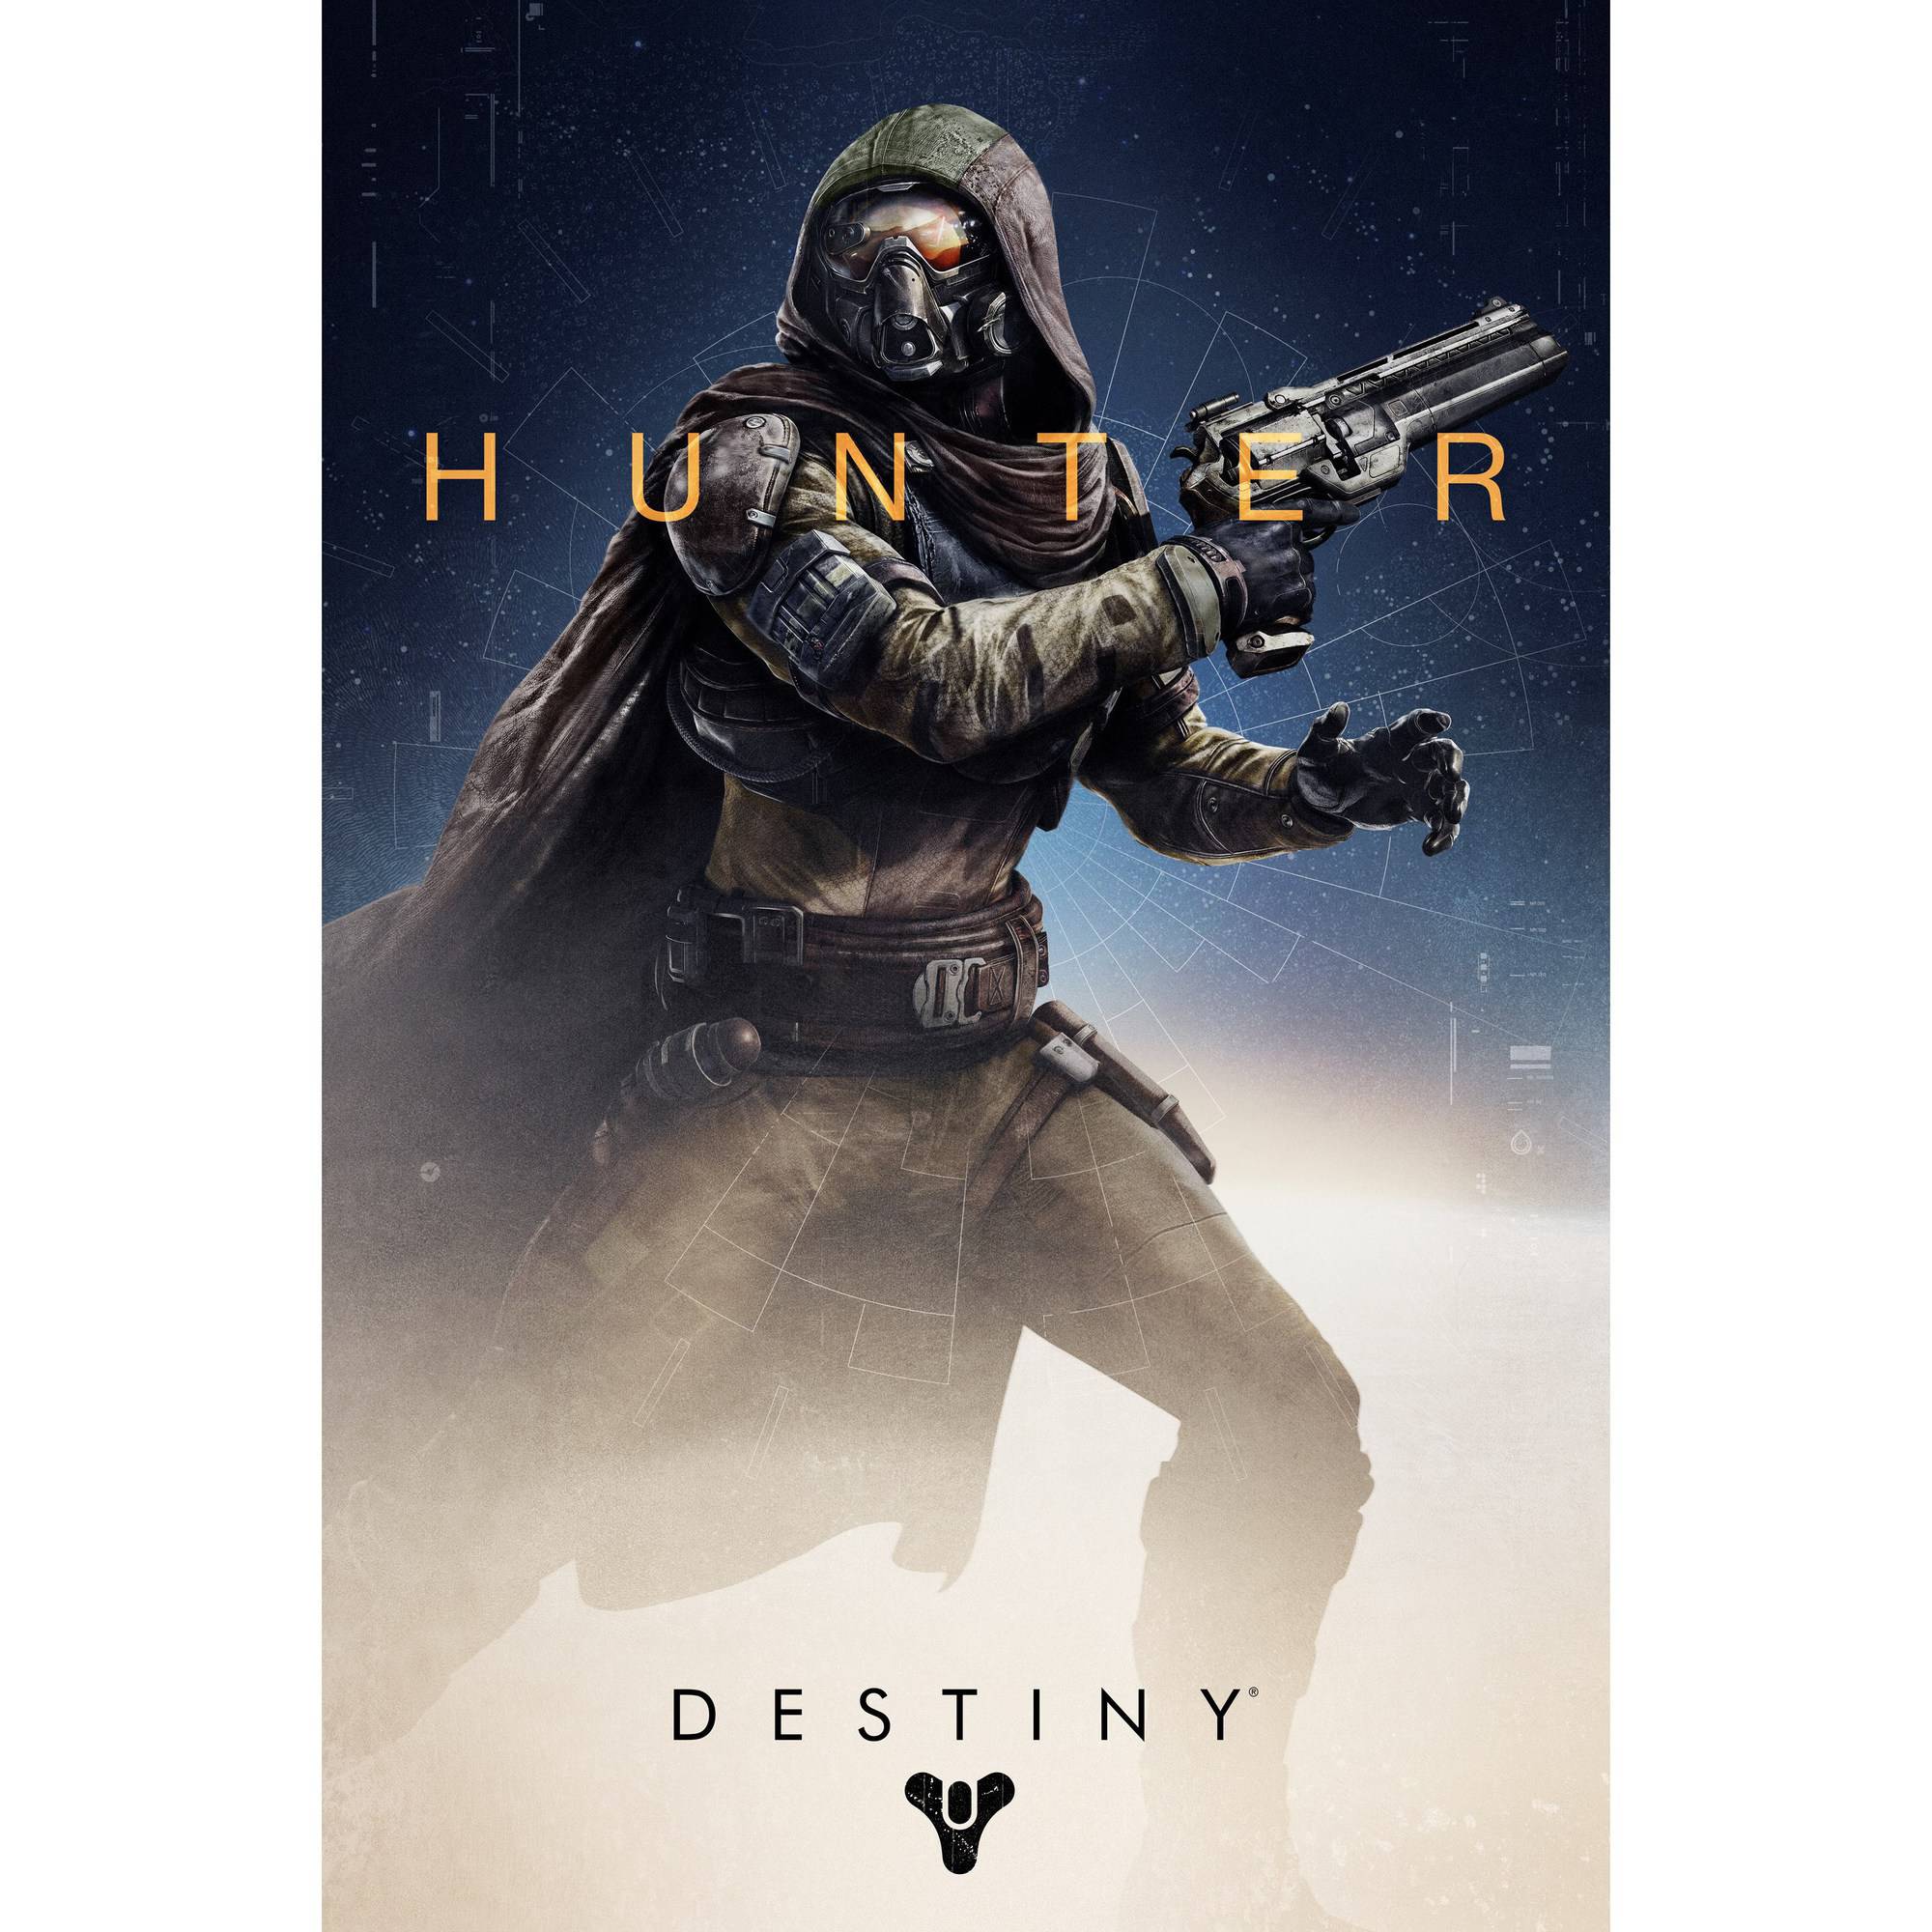 Destiny: The Taken King Legendary Edition, Activision, PlayStation 4, 047875874428 - image 31 of 31